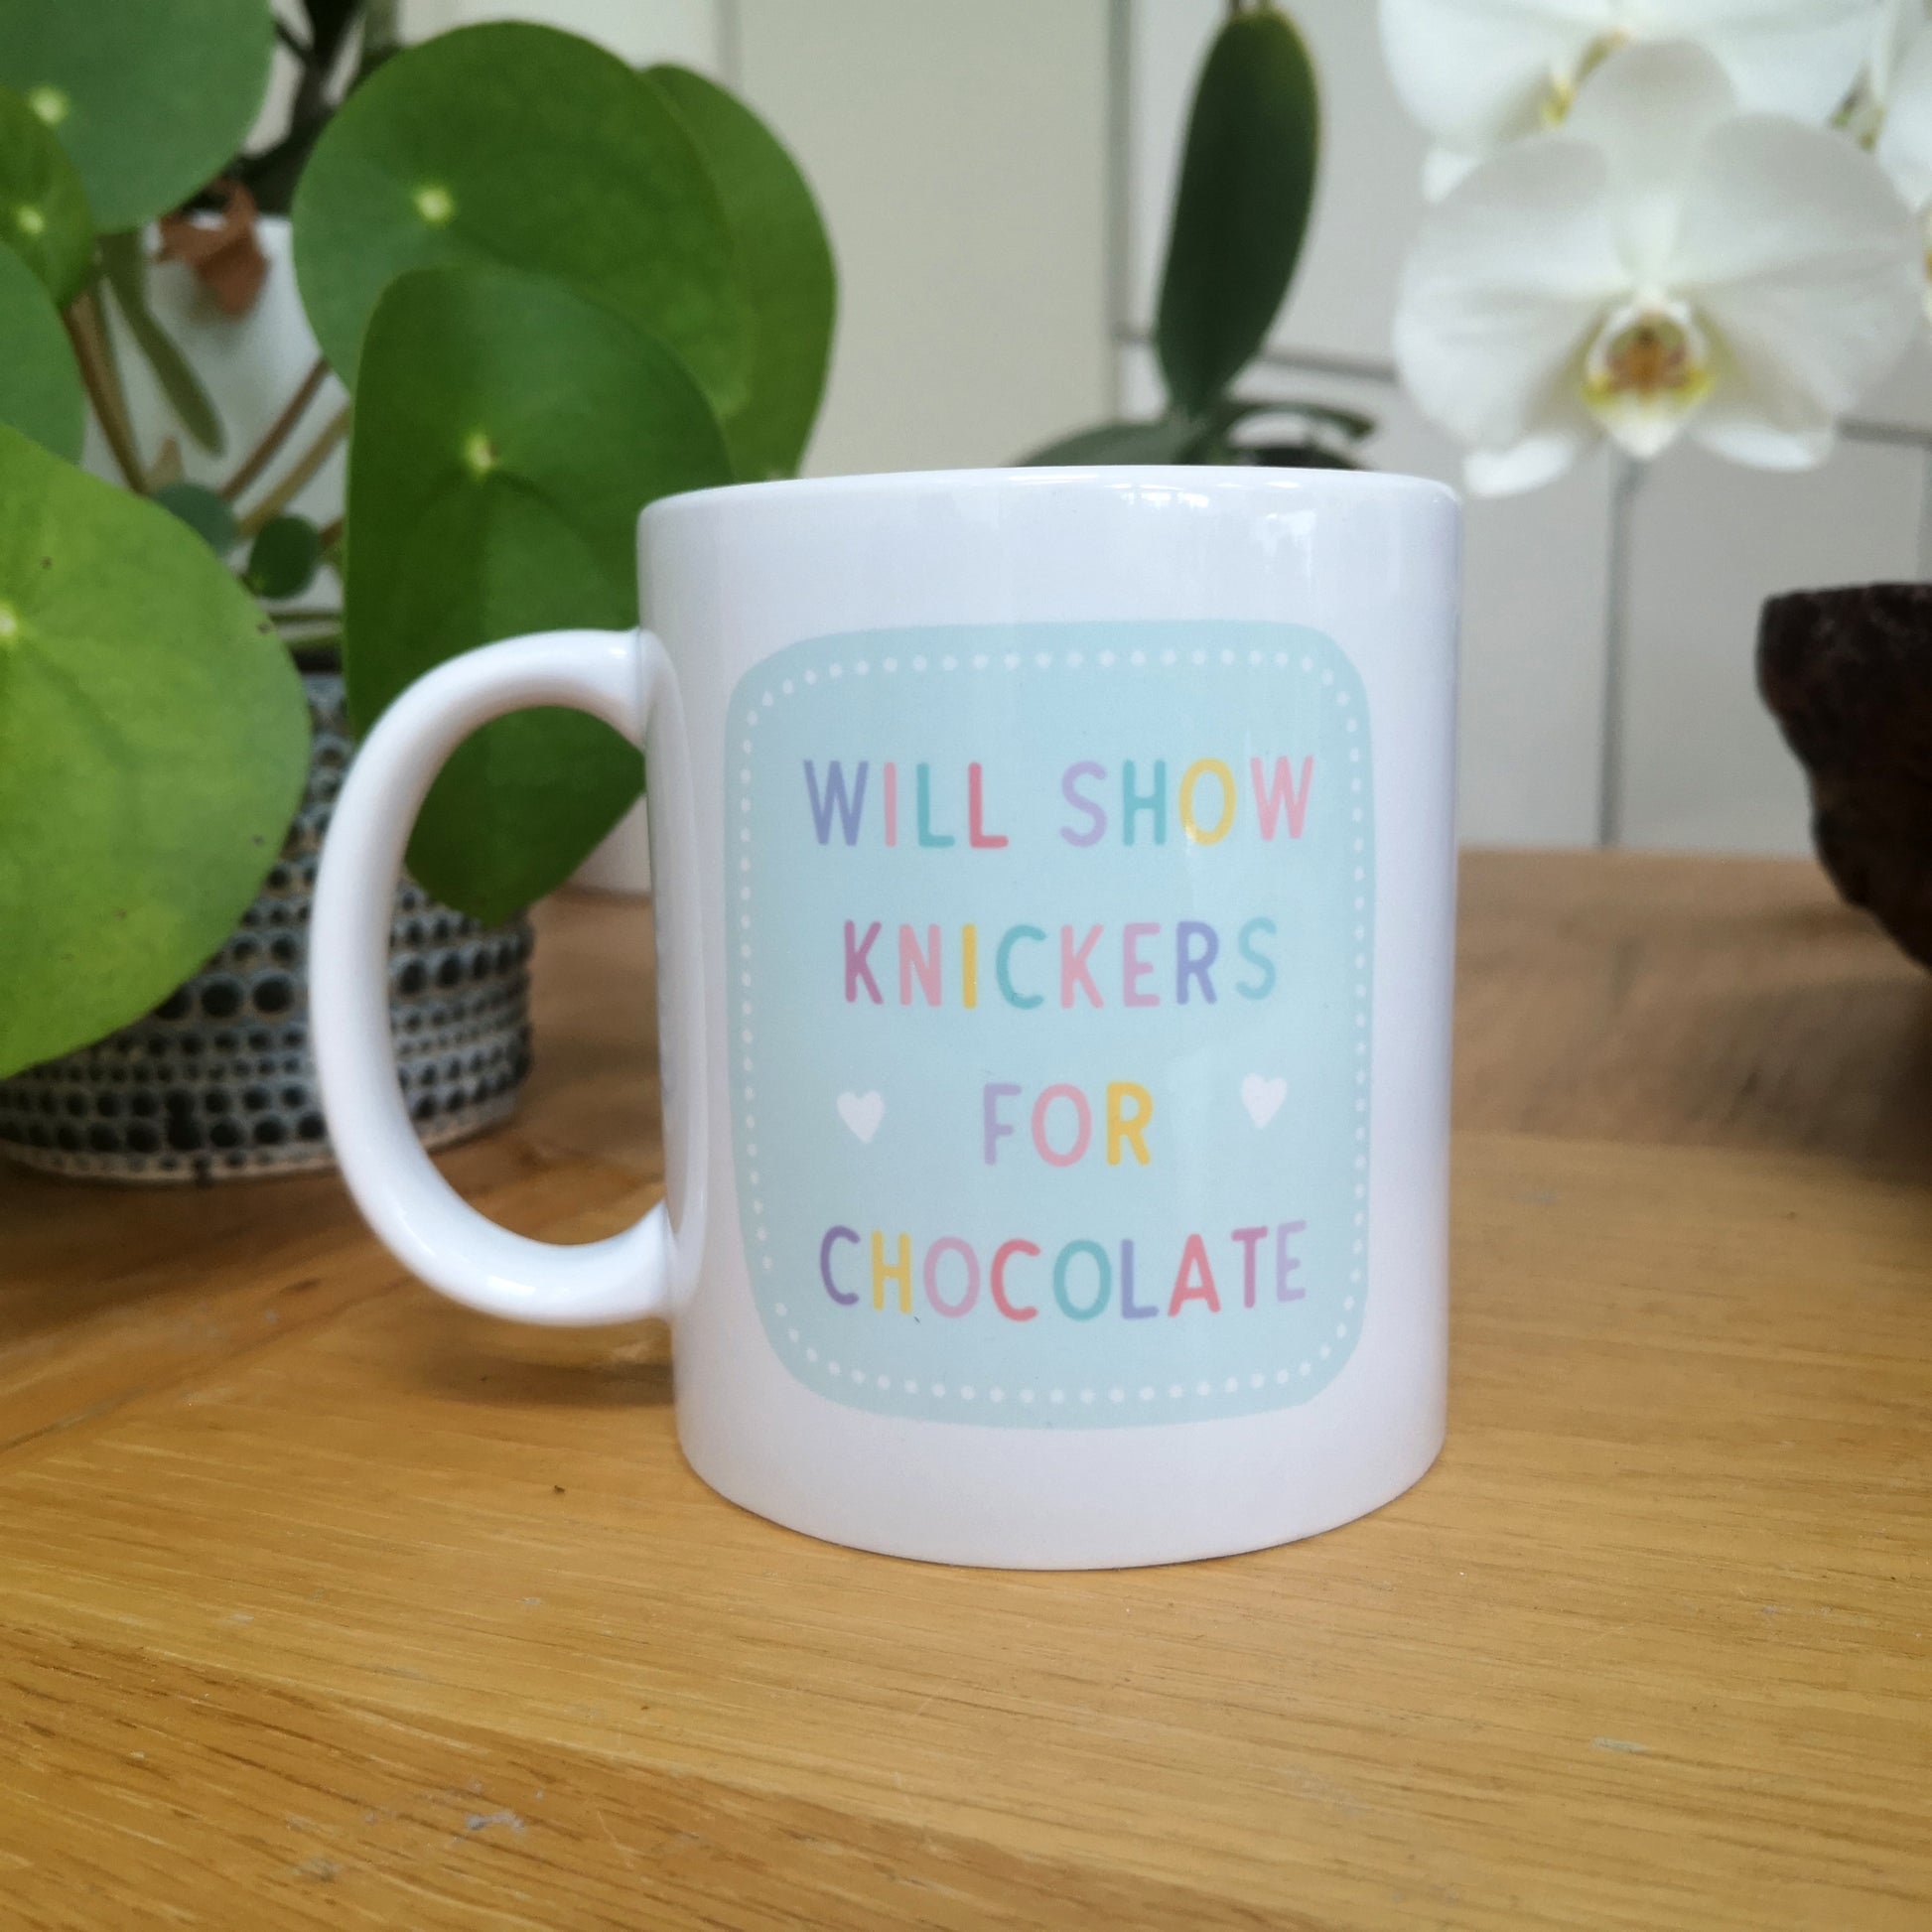 A ceramic mug with 'WILL SHOW KNICKERS FOR CHOCOLATE' in colourful writing.